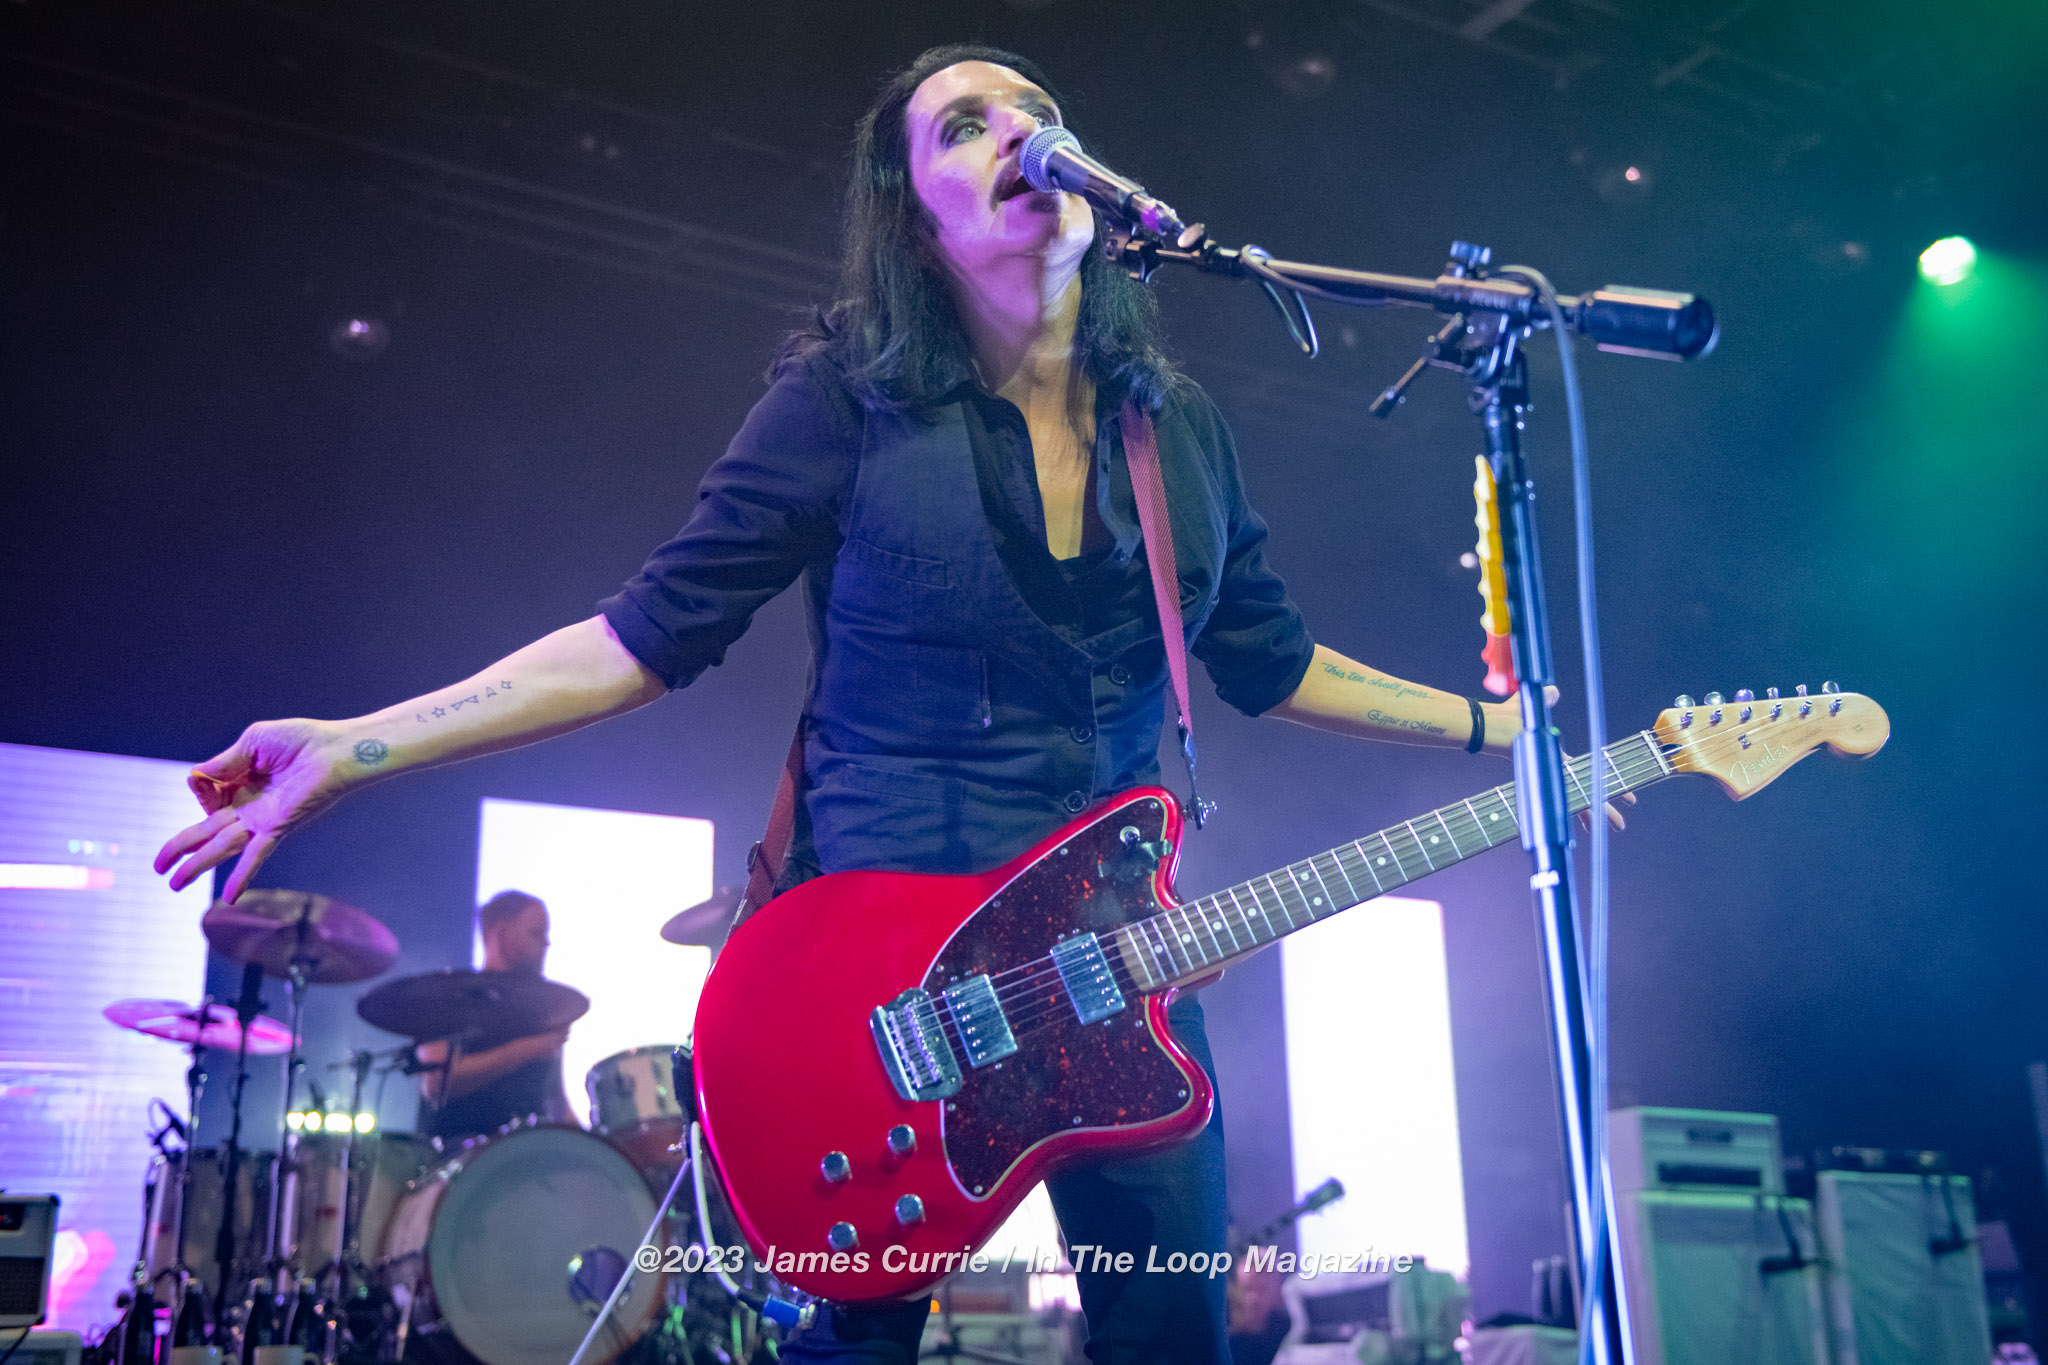 The Long Awaited Return Of Placebo Brings A New Look And Sound To A Familiar Band While Promoting Invigorating New Talent To The Scene